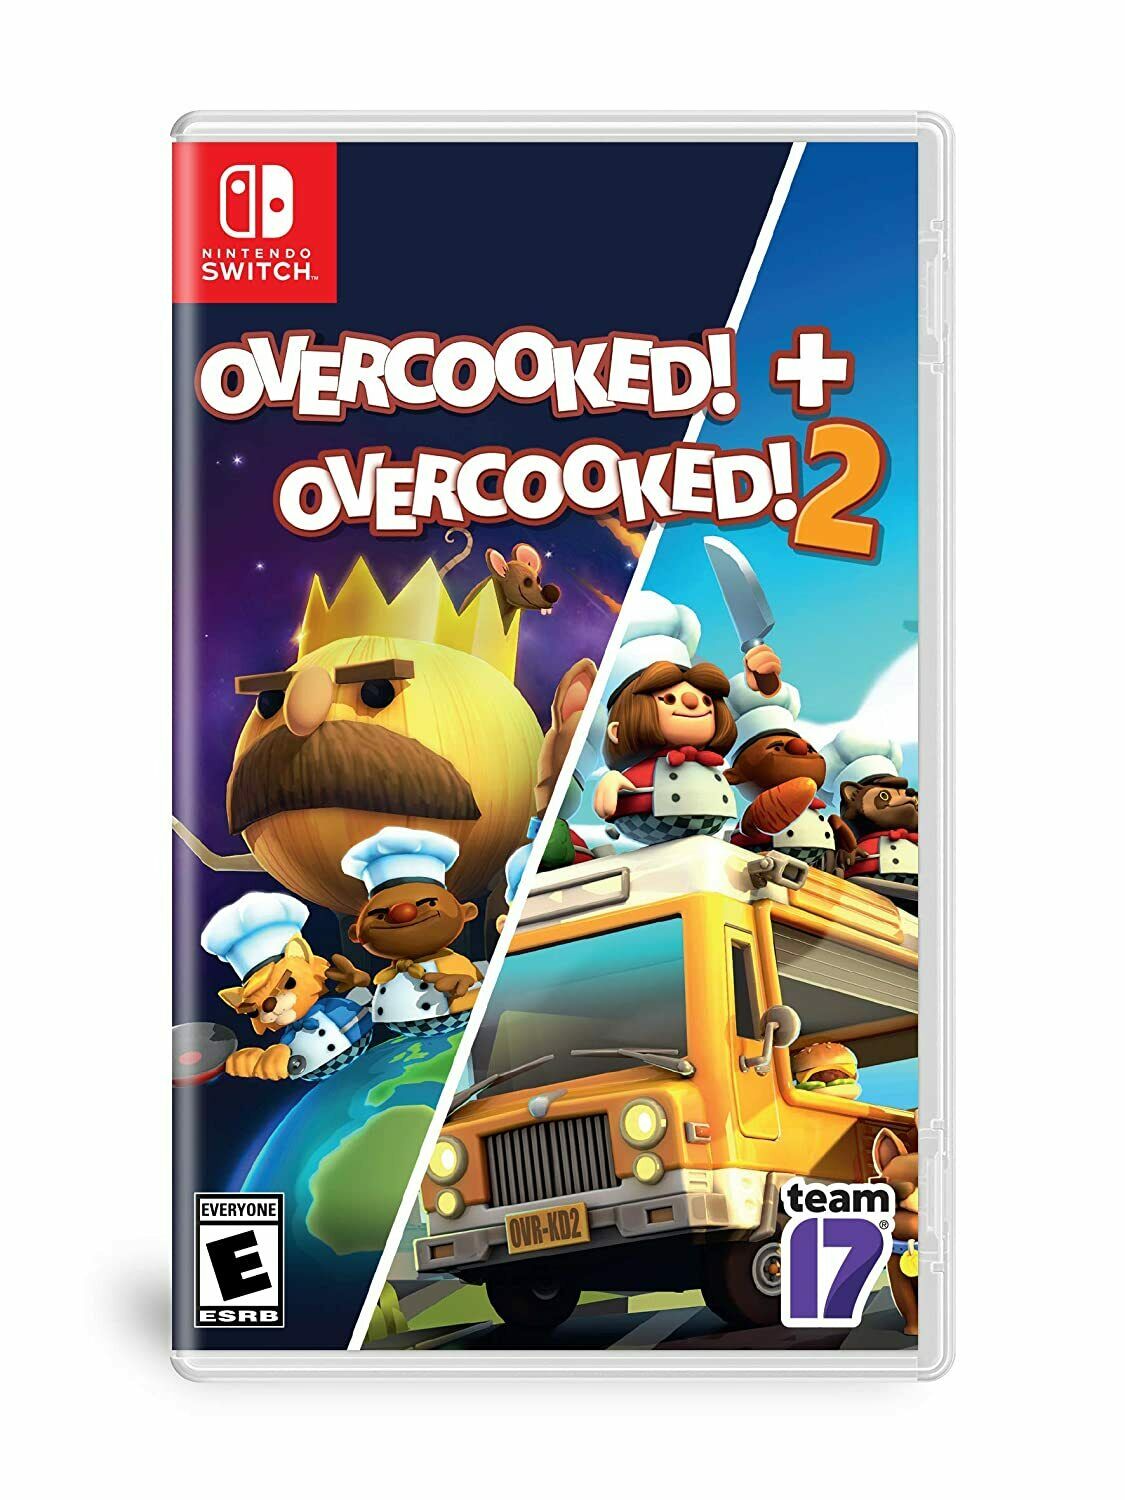 Lot Of 8 Overcooked 1 Special Edition + Overcooked 2 Nintendo Switch